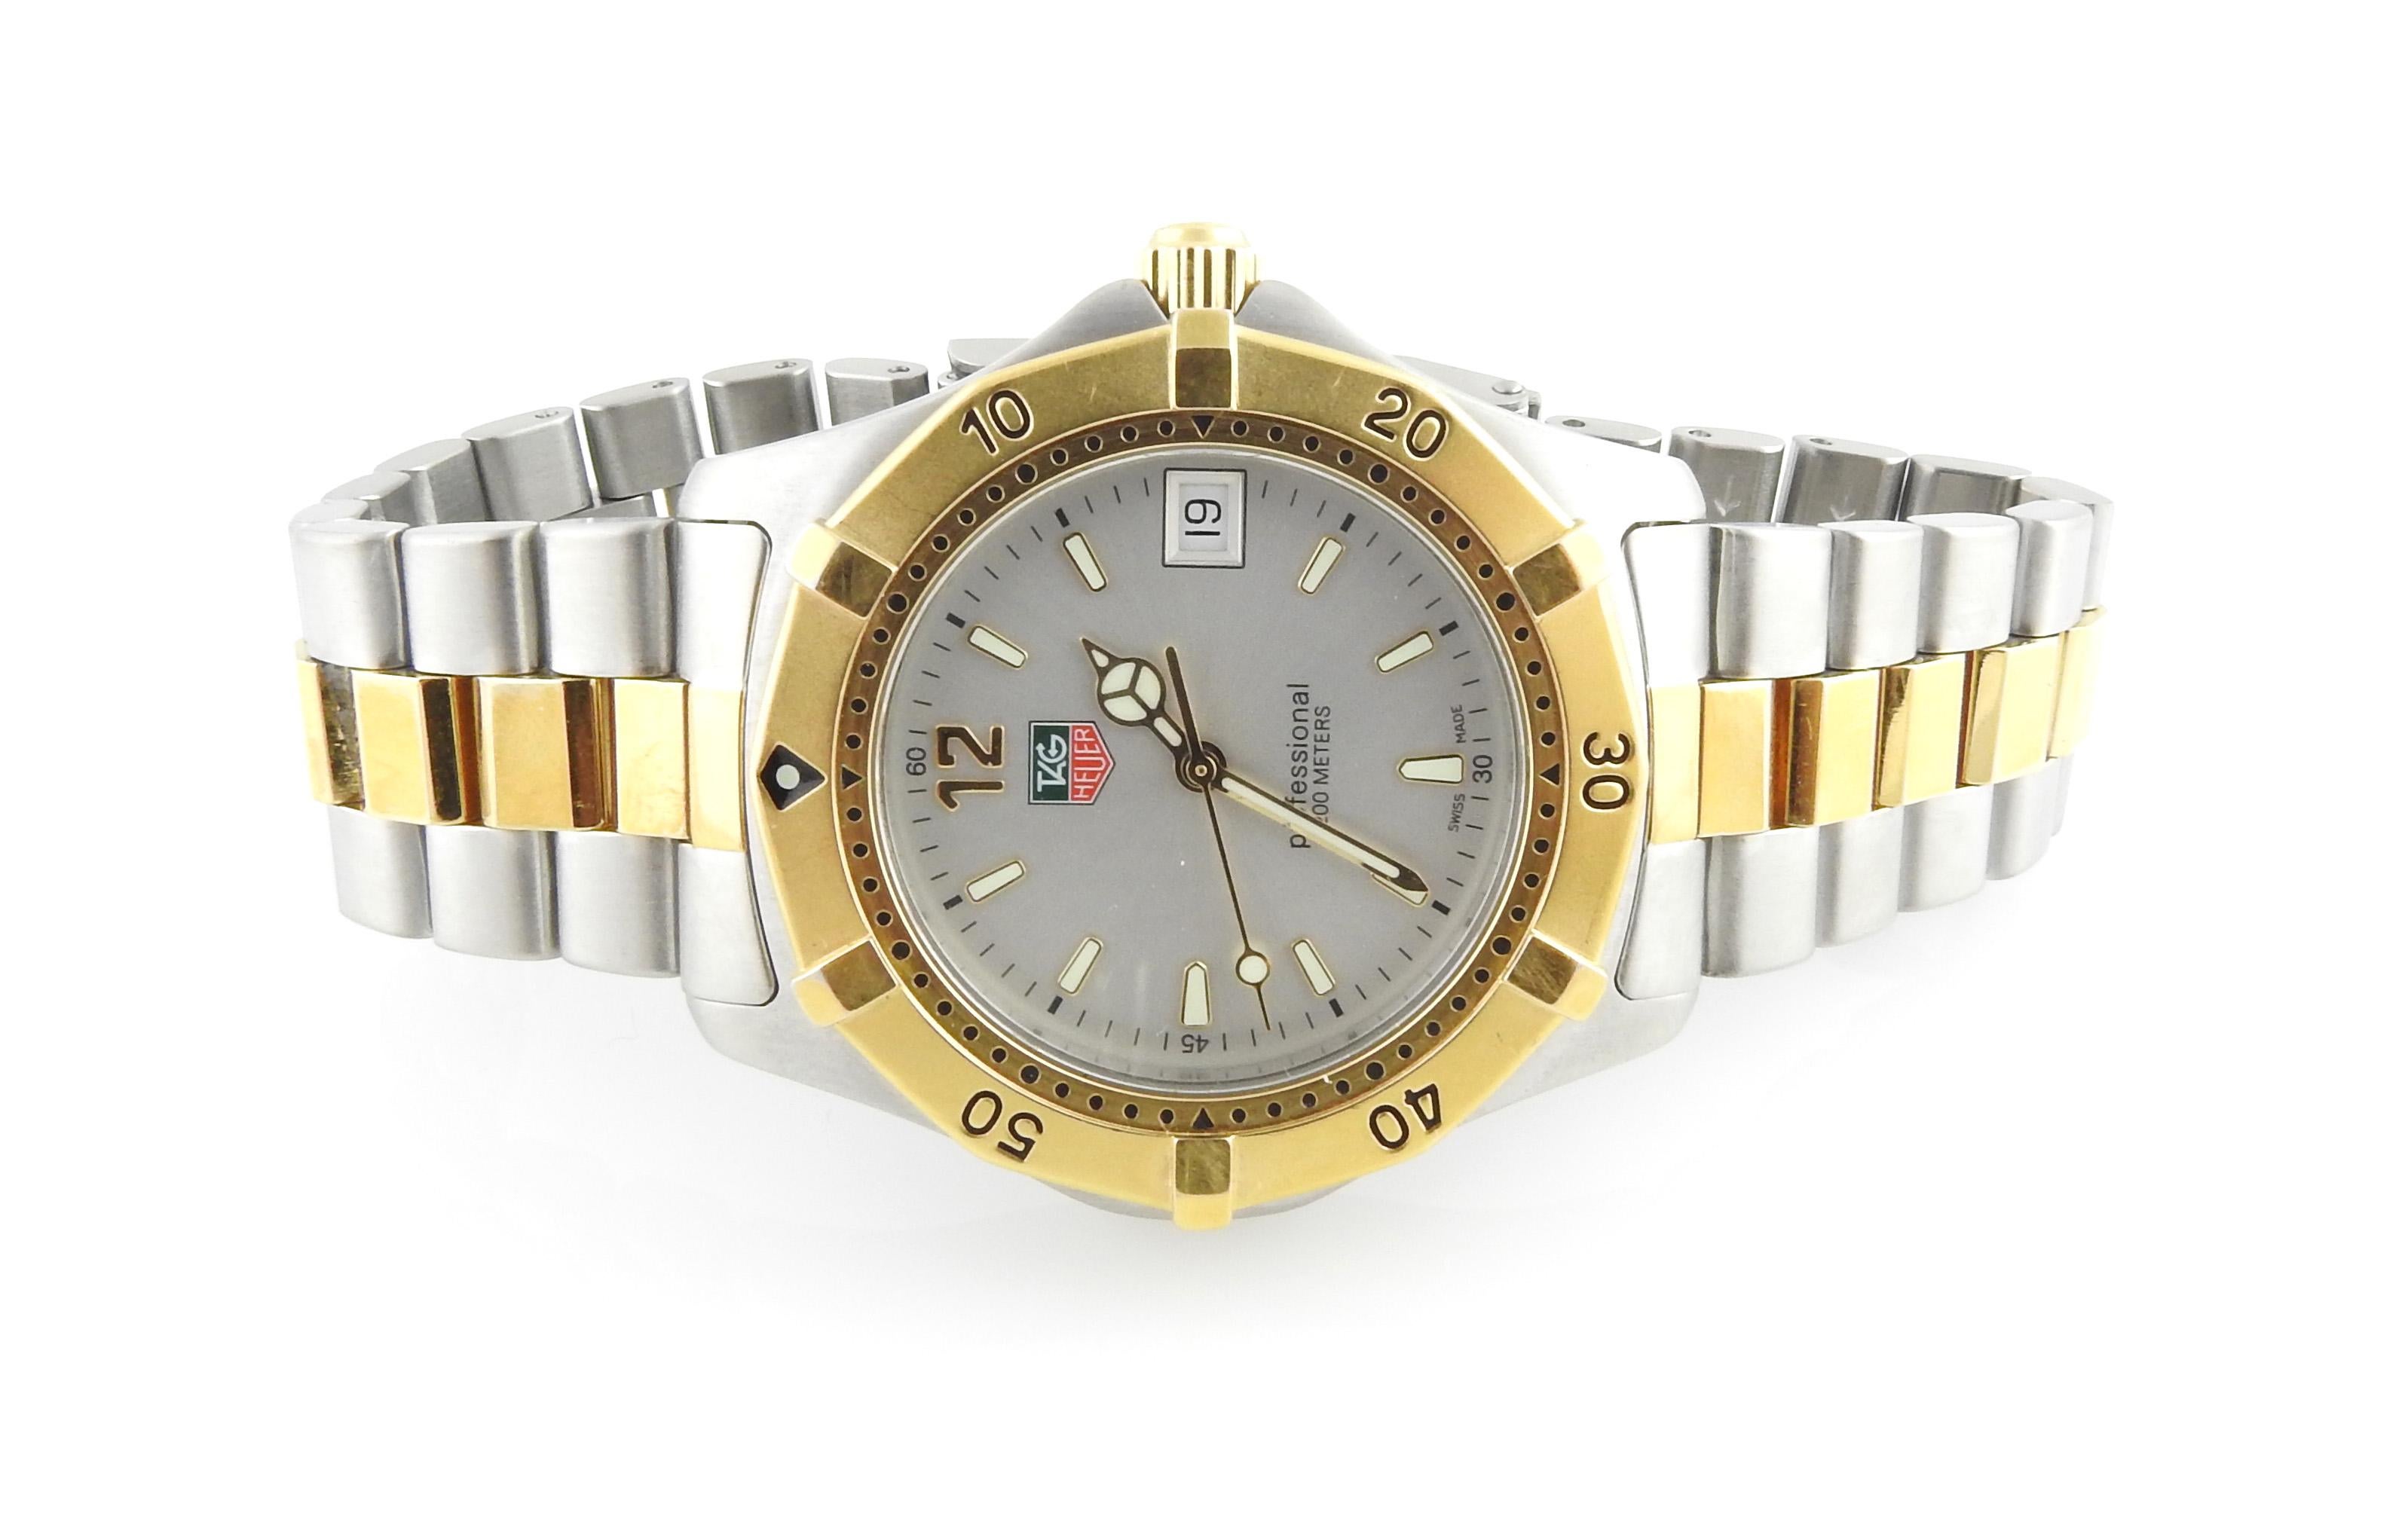 TAG Heuer Professional Men's Watch

Model: WK1120-0
Serial: QP3075

TAG Heuer men's two tone watch - stainless steel and gold

Quartz movement

36mm case size

Silver dial

Gold Bezel, steel case

Gold and steel band - Fits up to 7.5